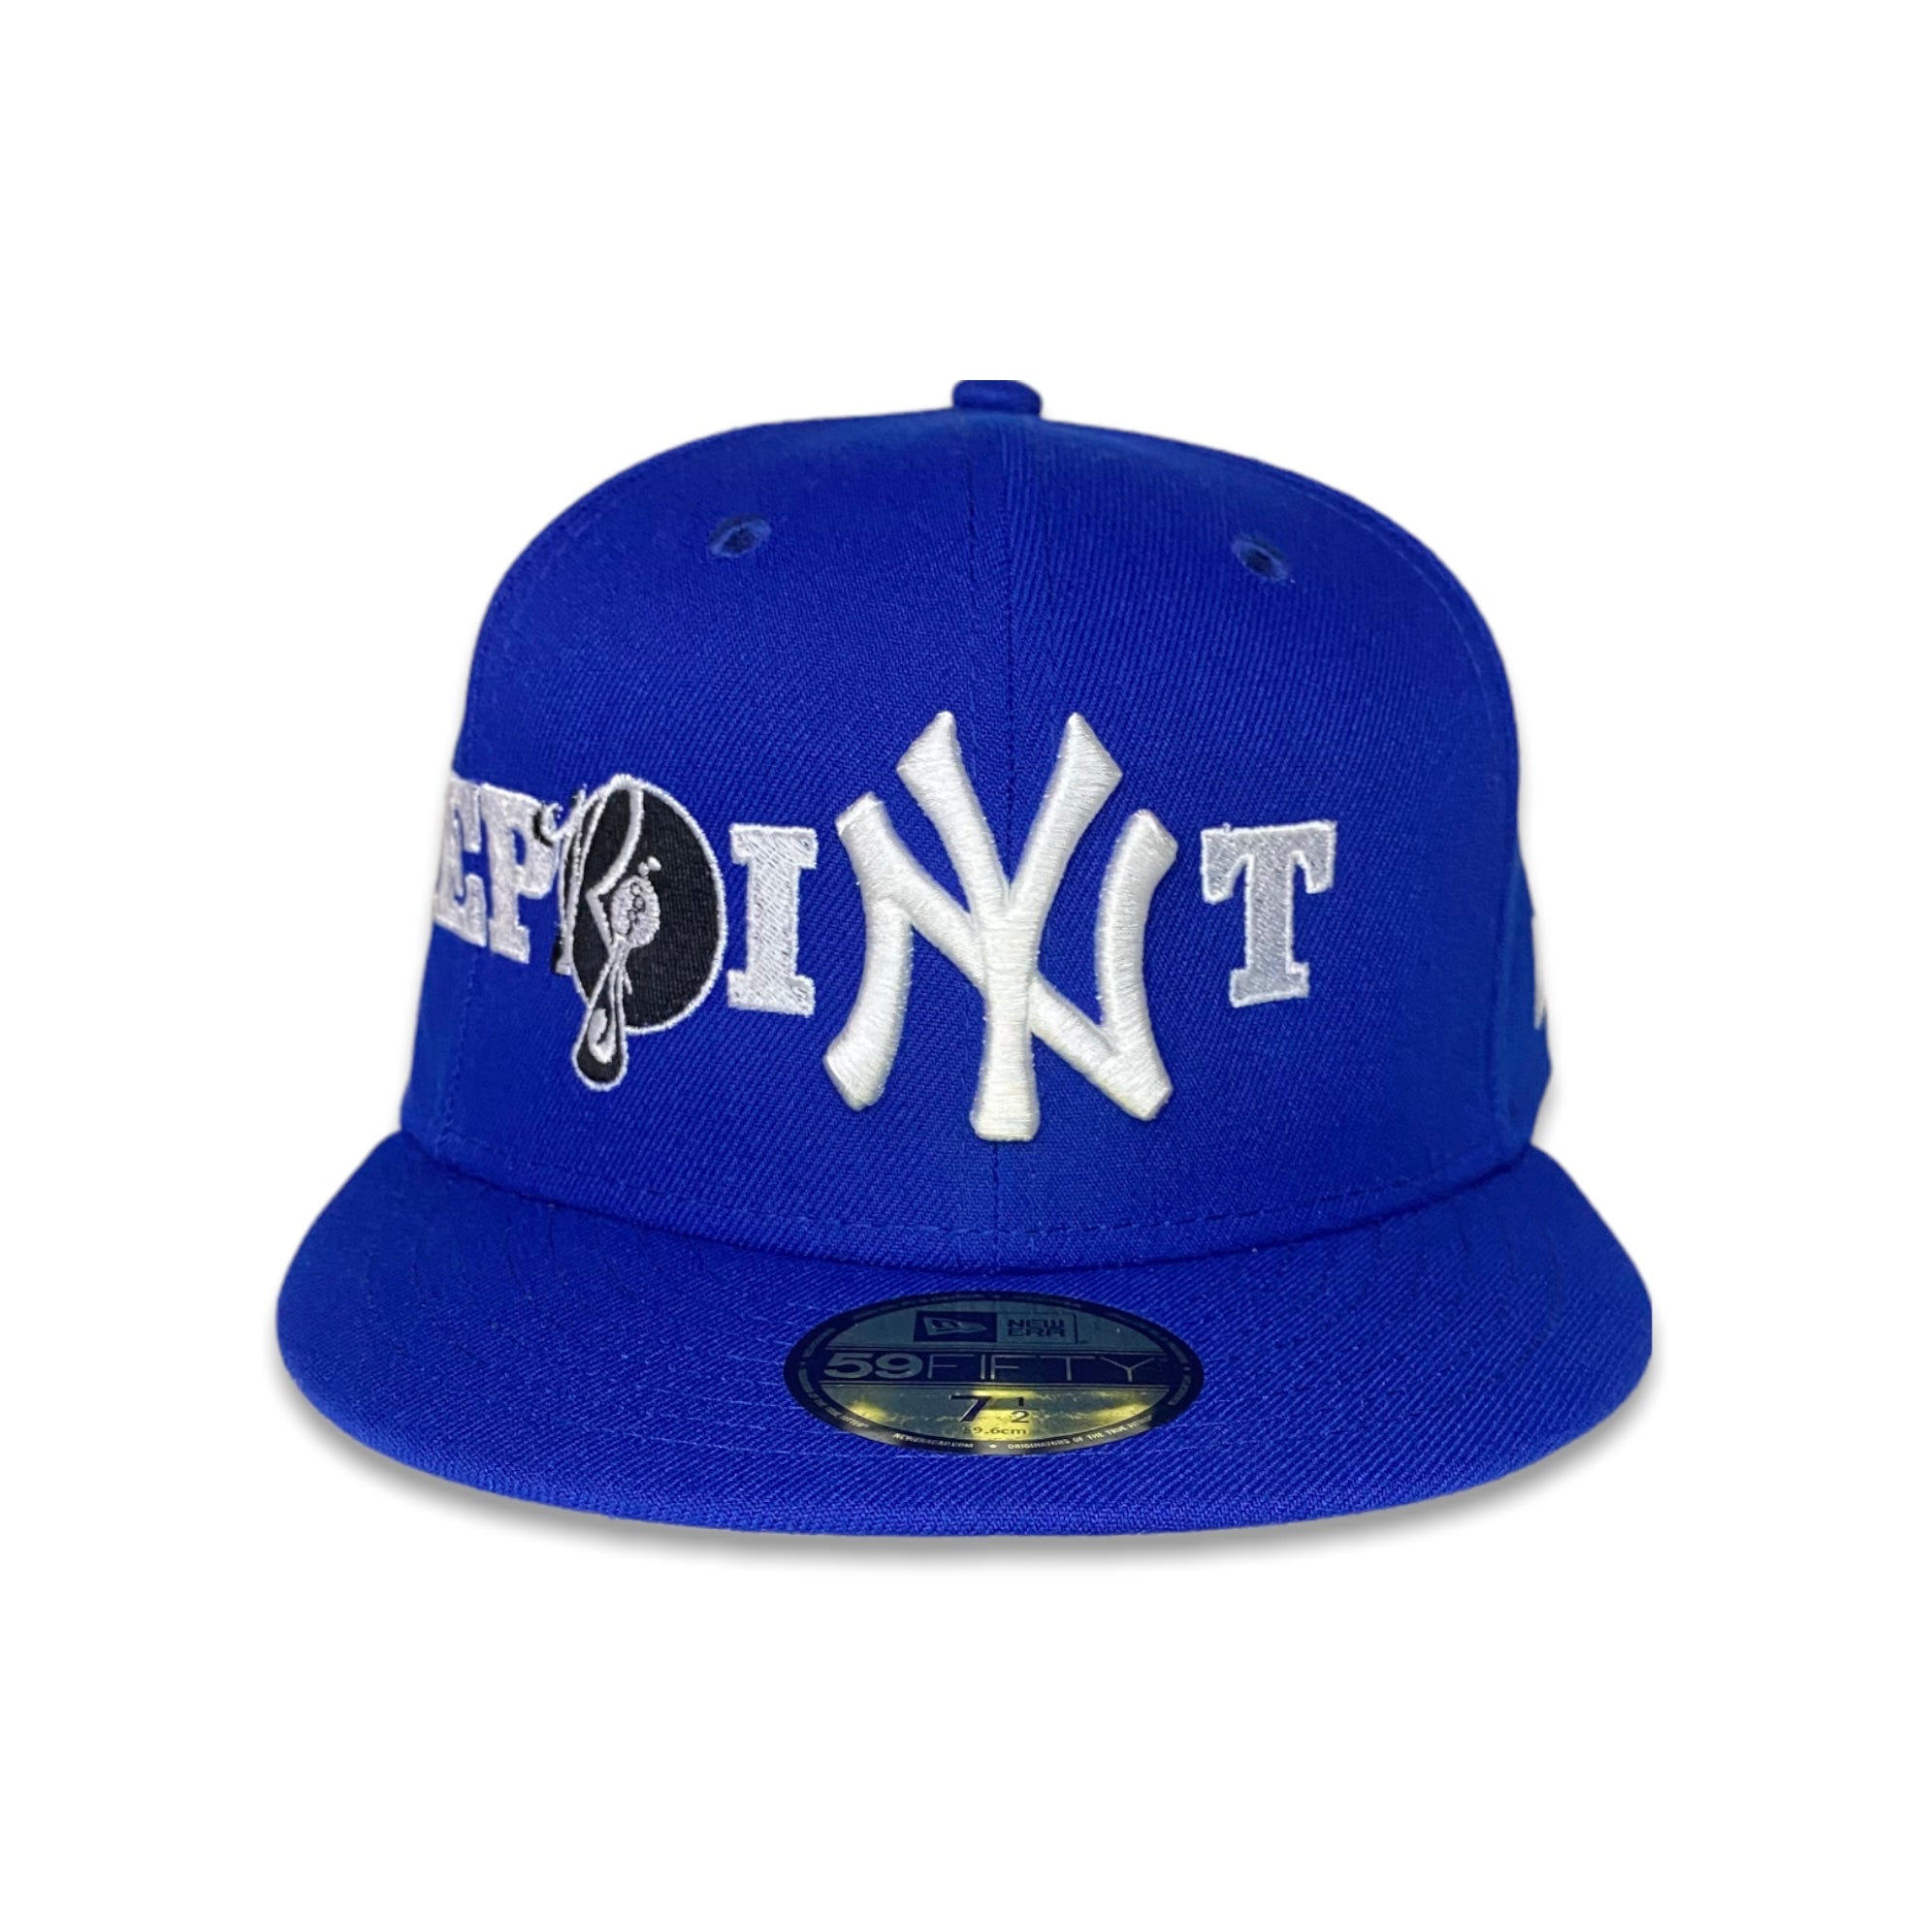 New Era Paper Planes Rock Nation Jay Z Men's Hat Fitted Cap 59Fifty  Blue #694